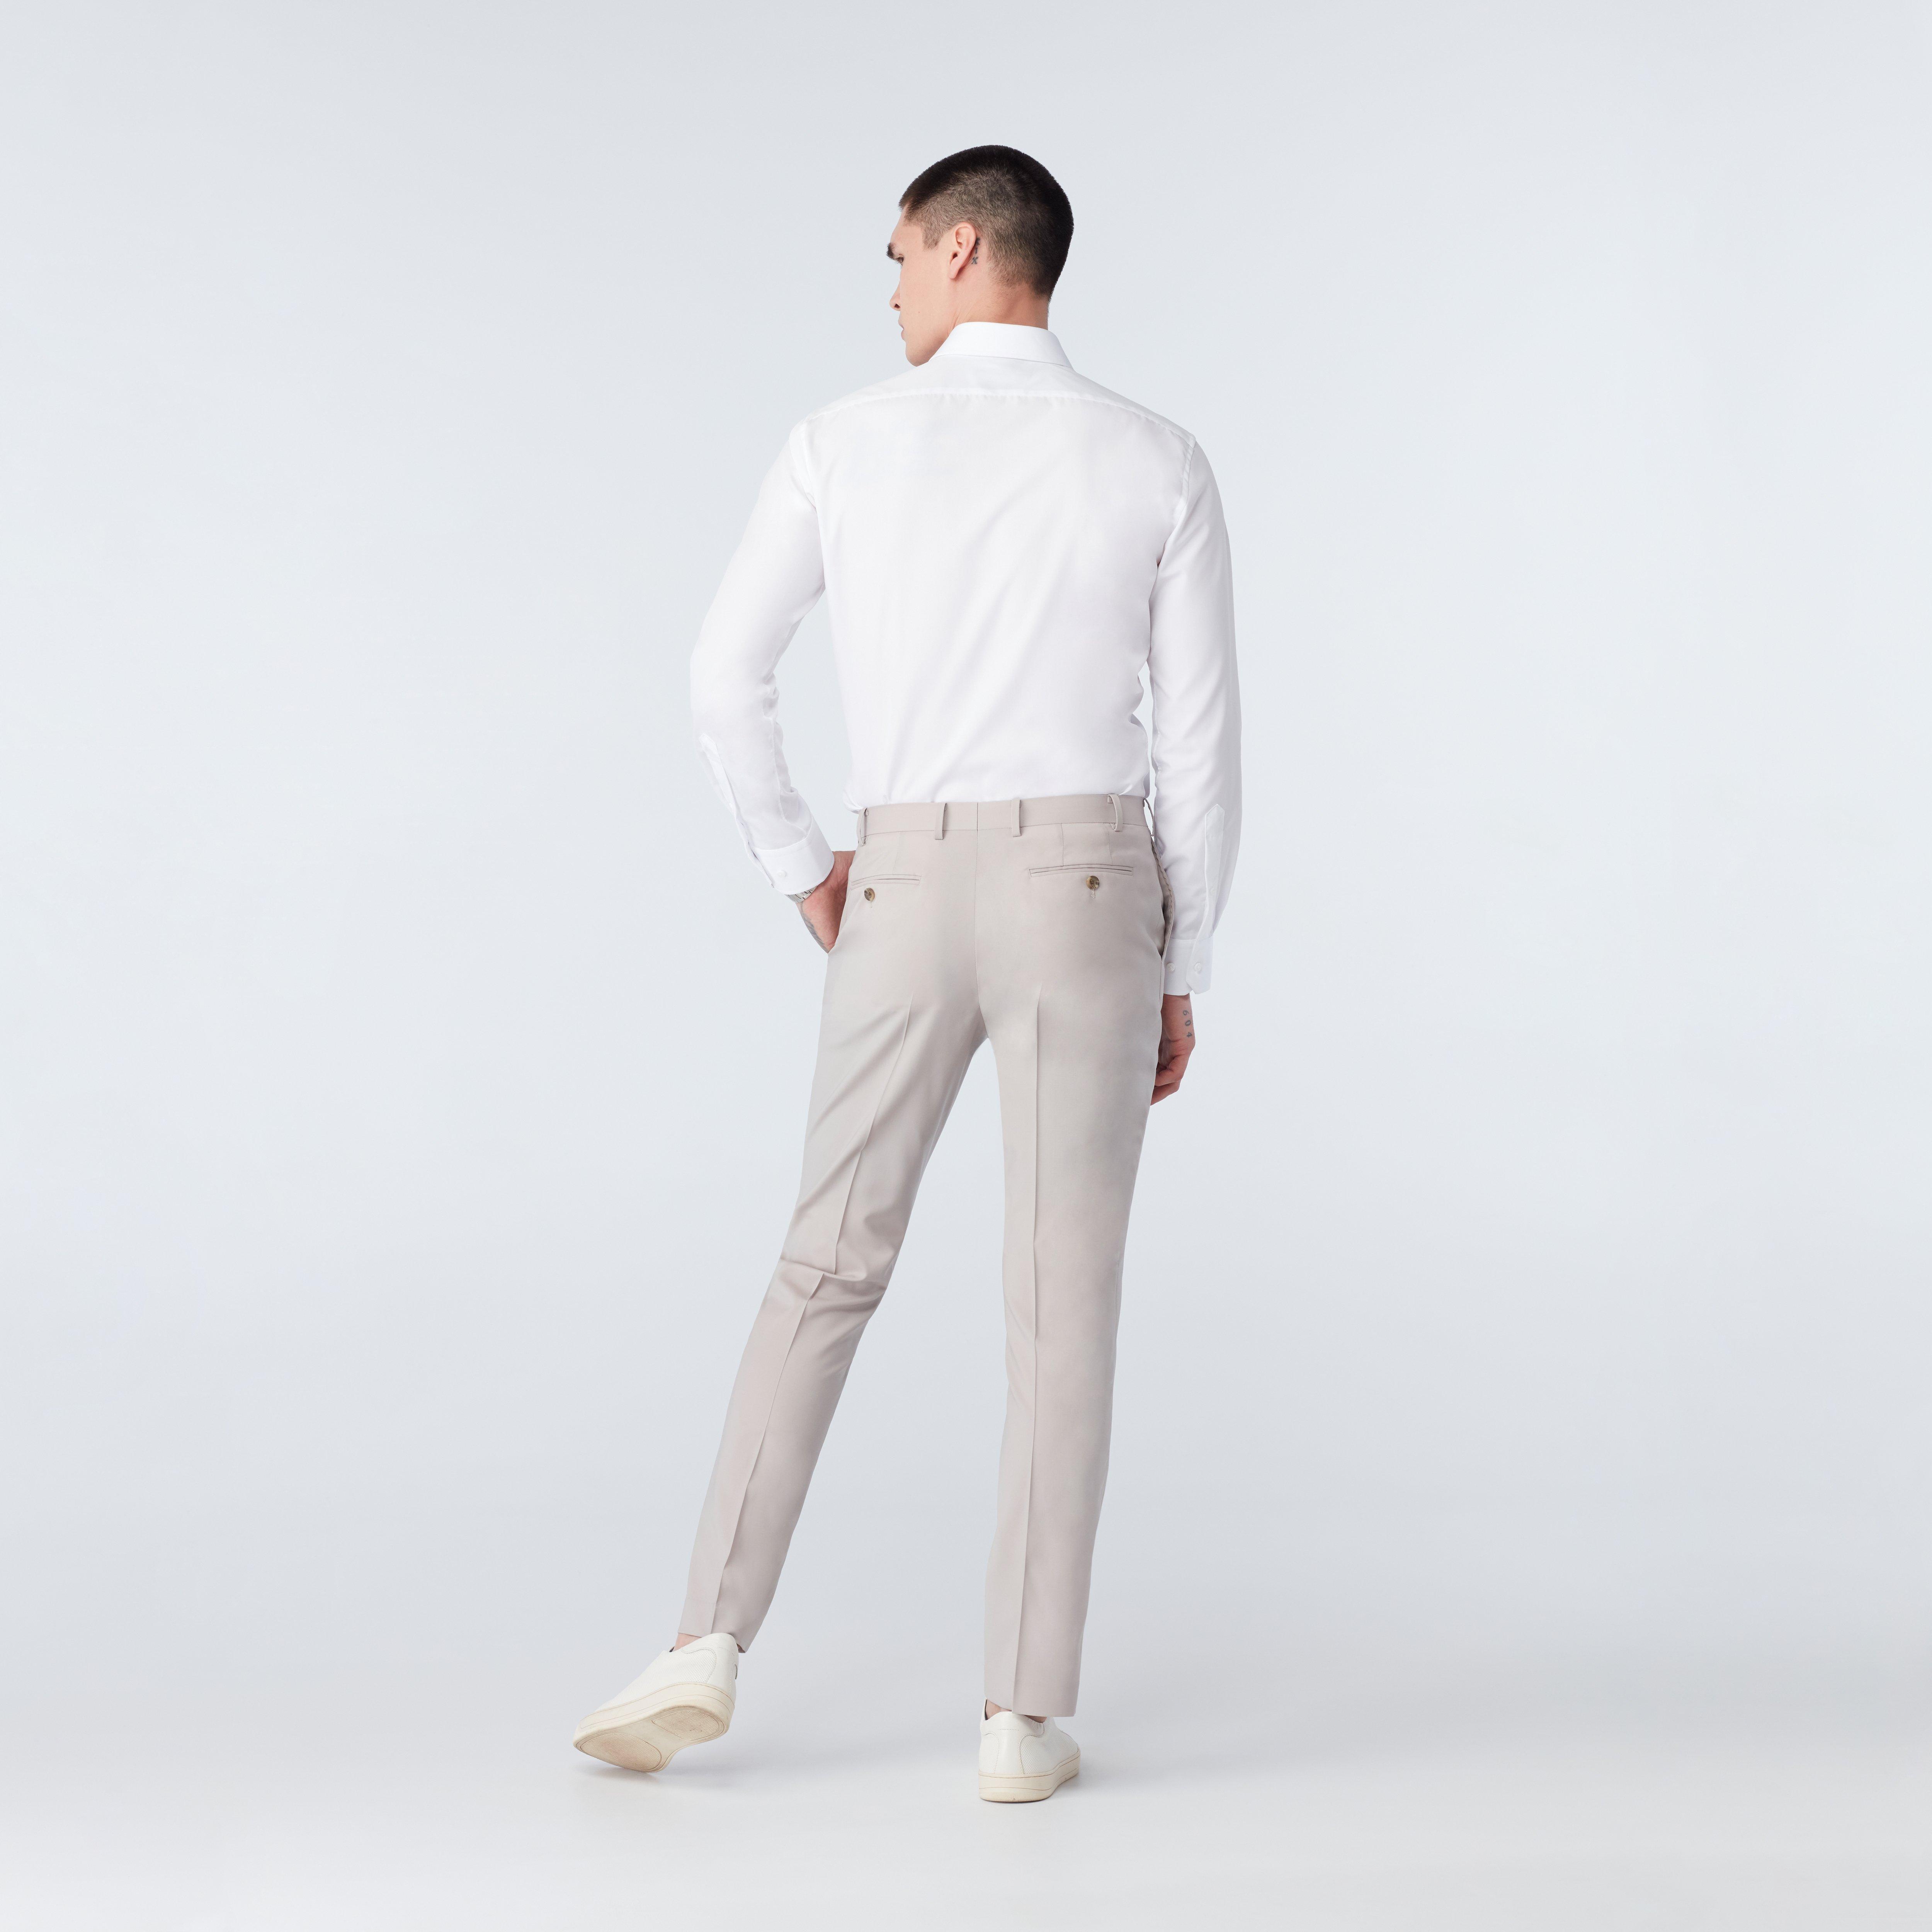 Custom Suits Made For You - Milano Sand Suit | INDOCHINO